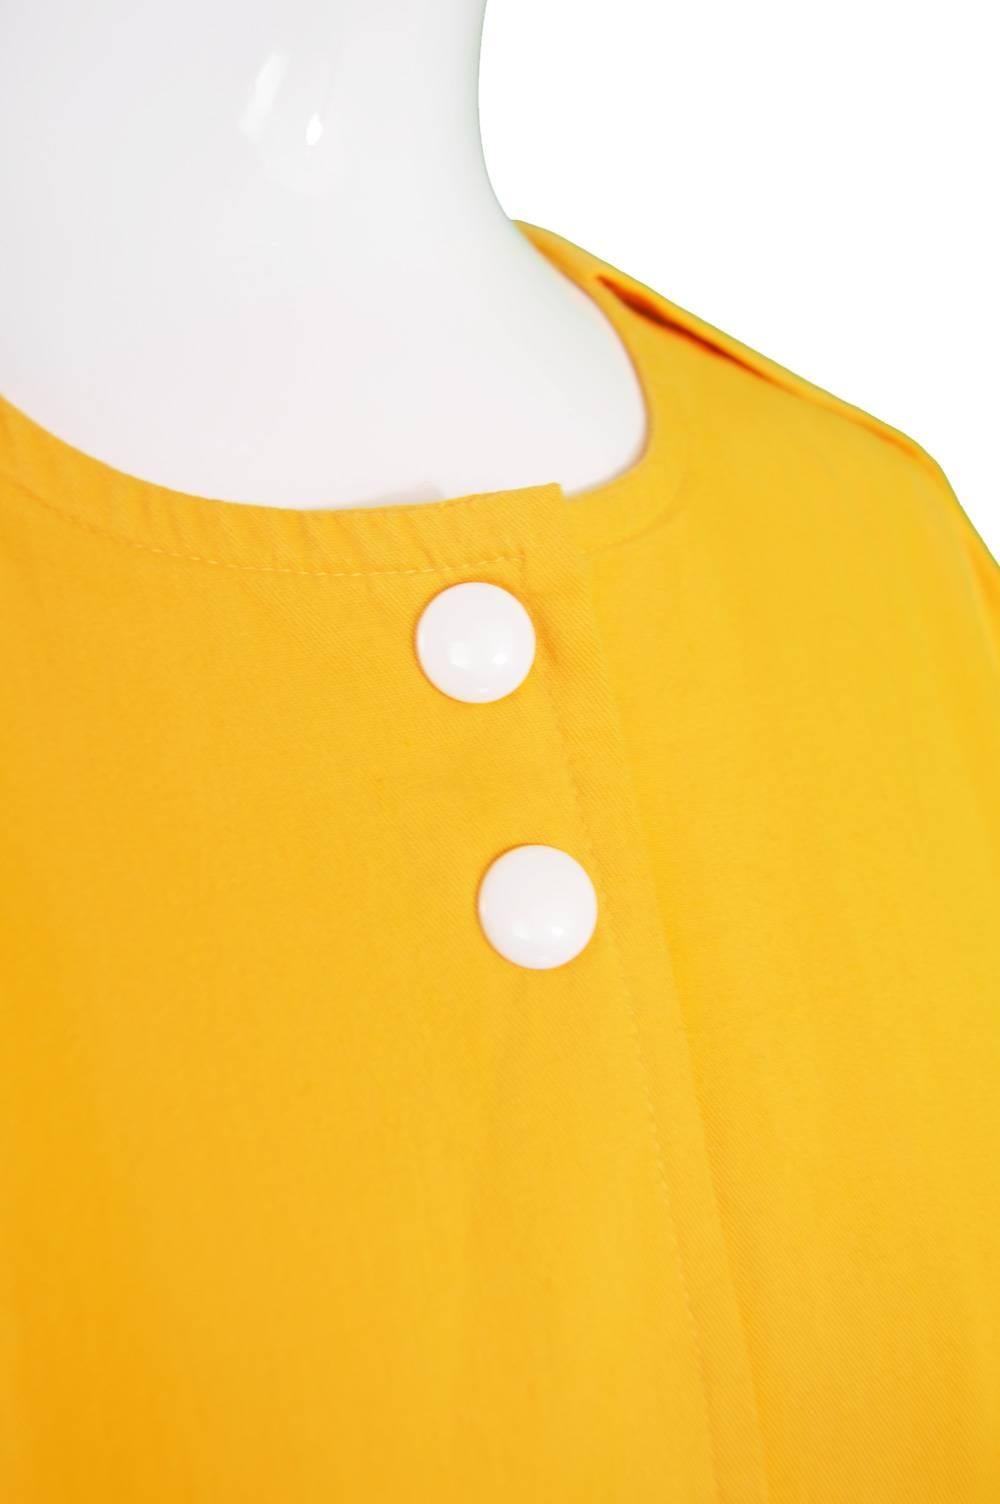 Pierre Cardin Mustard Yellow Dress with Oversized Patch Pockets, 1980s For Sale 1